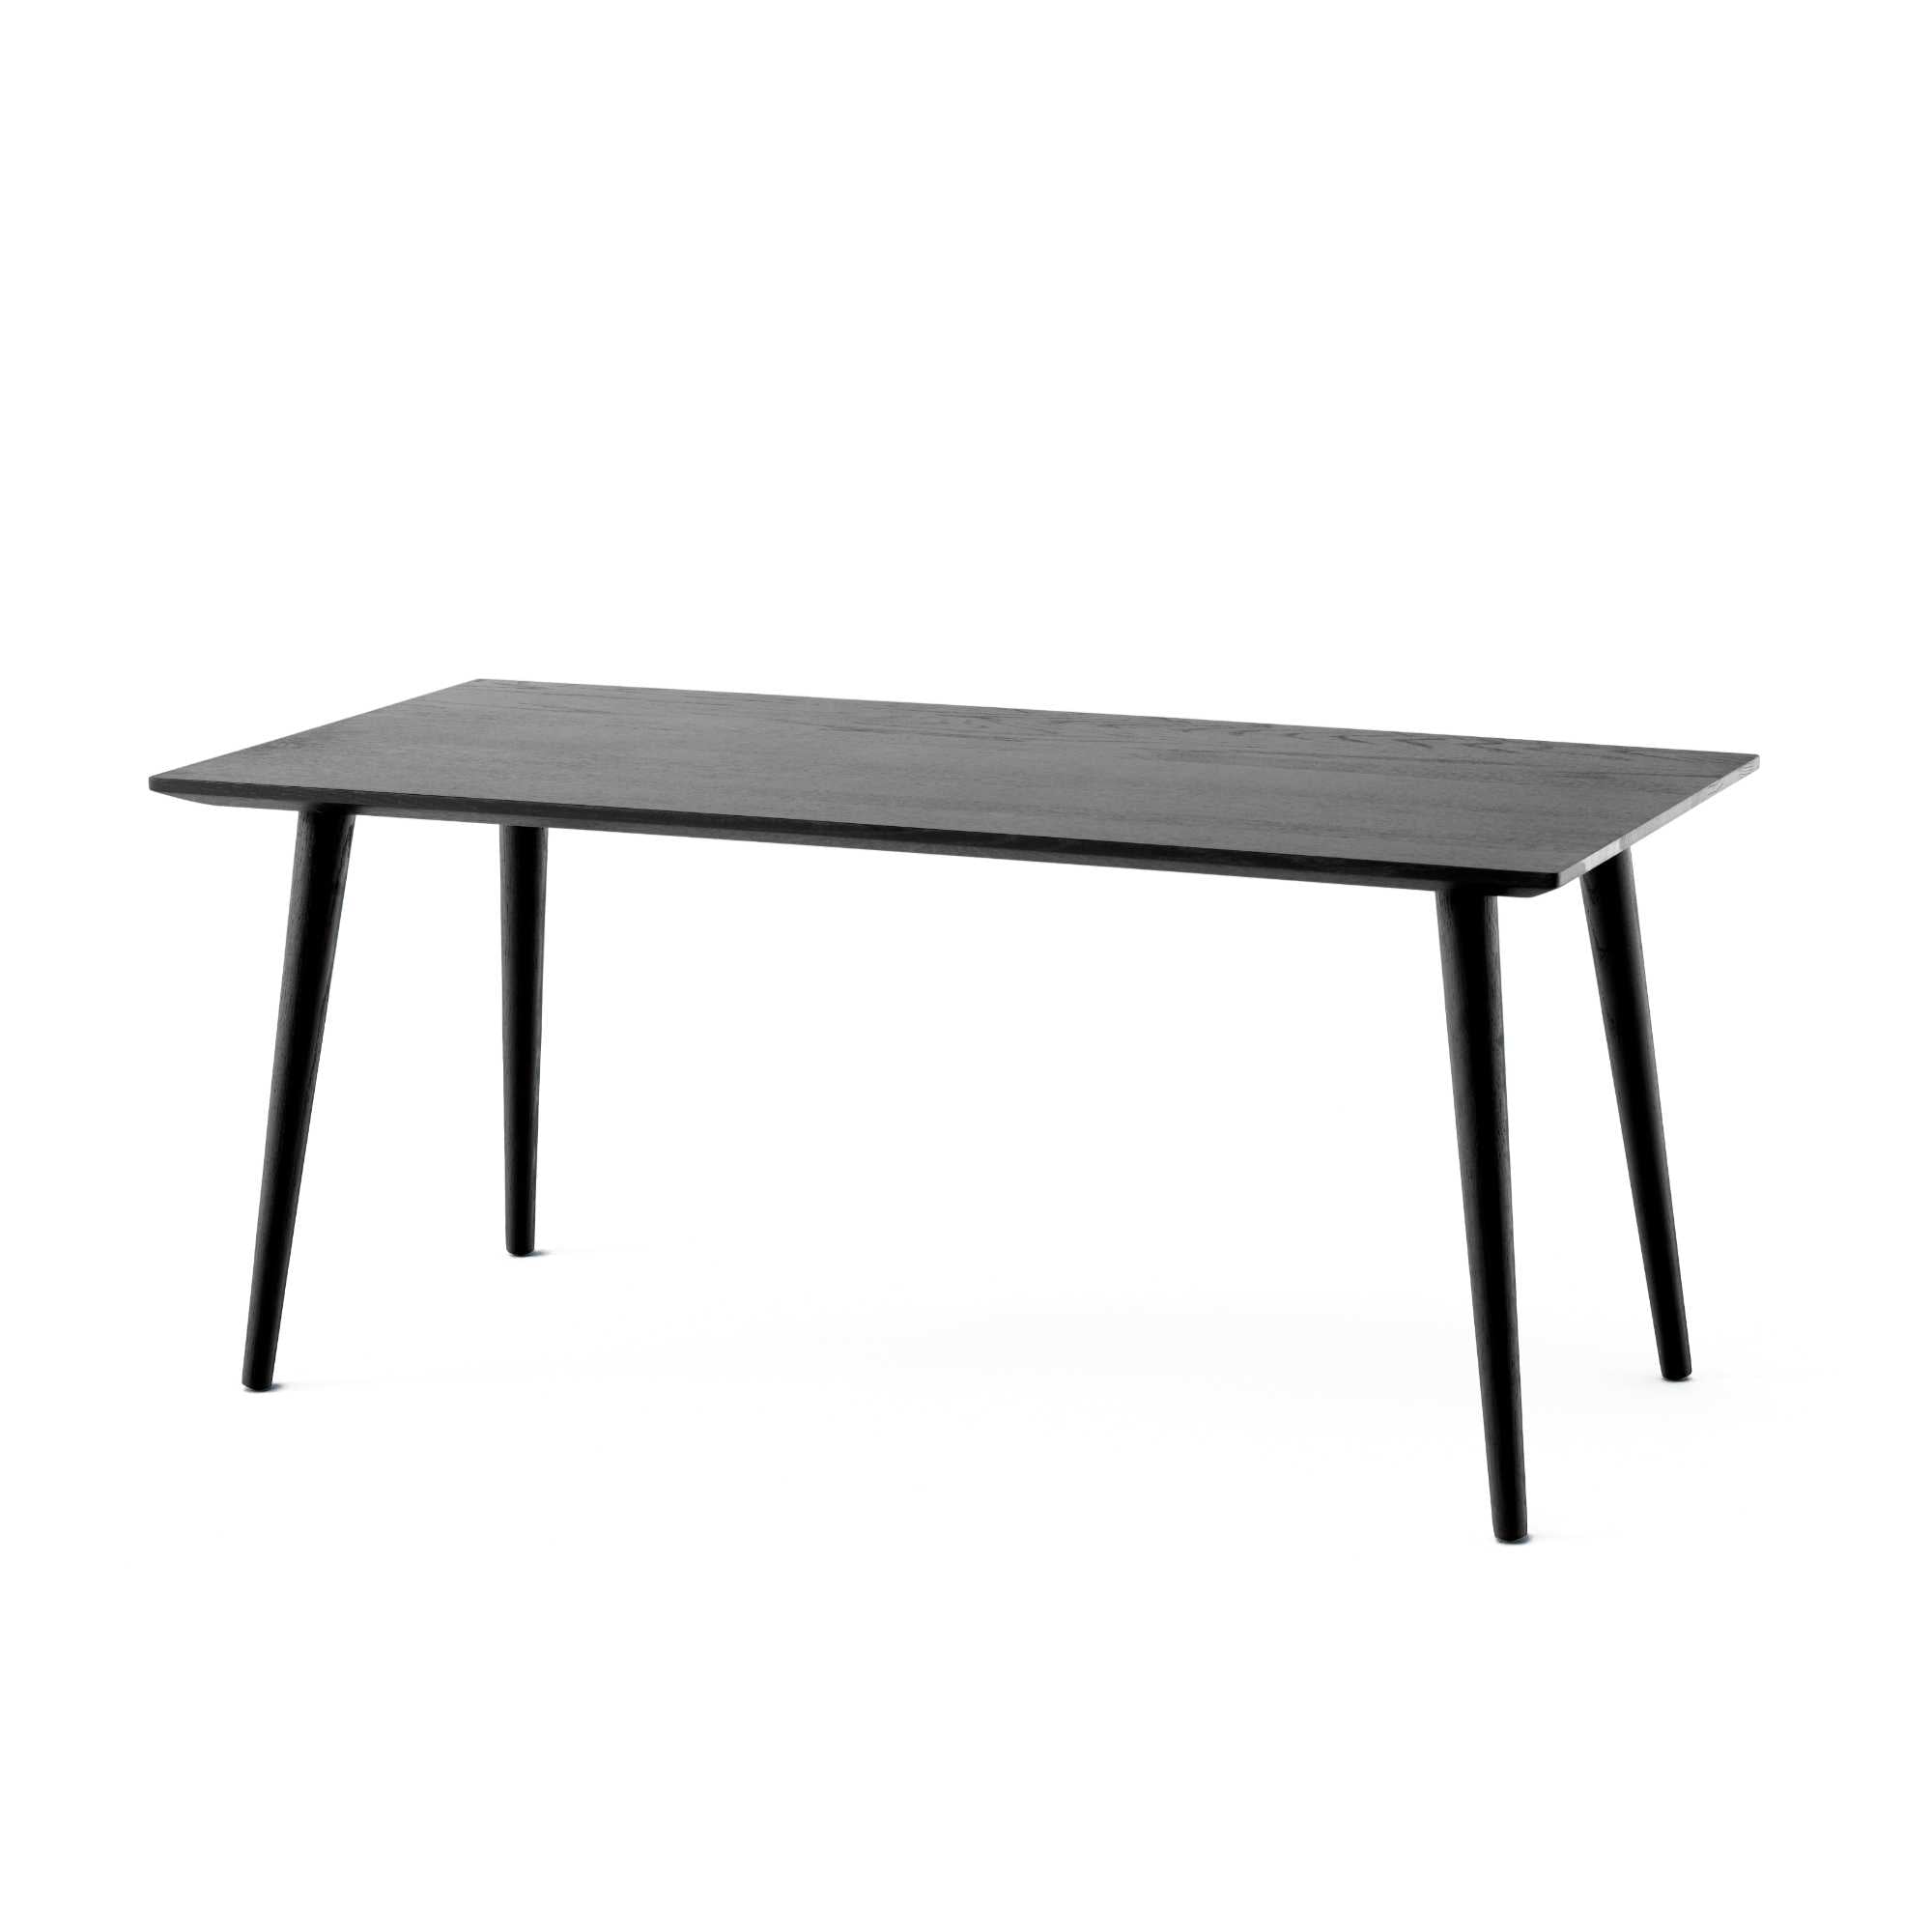 &Tradition SK23 In Between Coffee Table, black lacquered oak